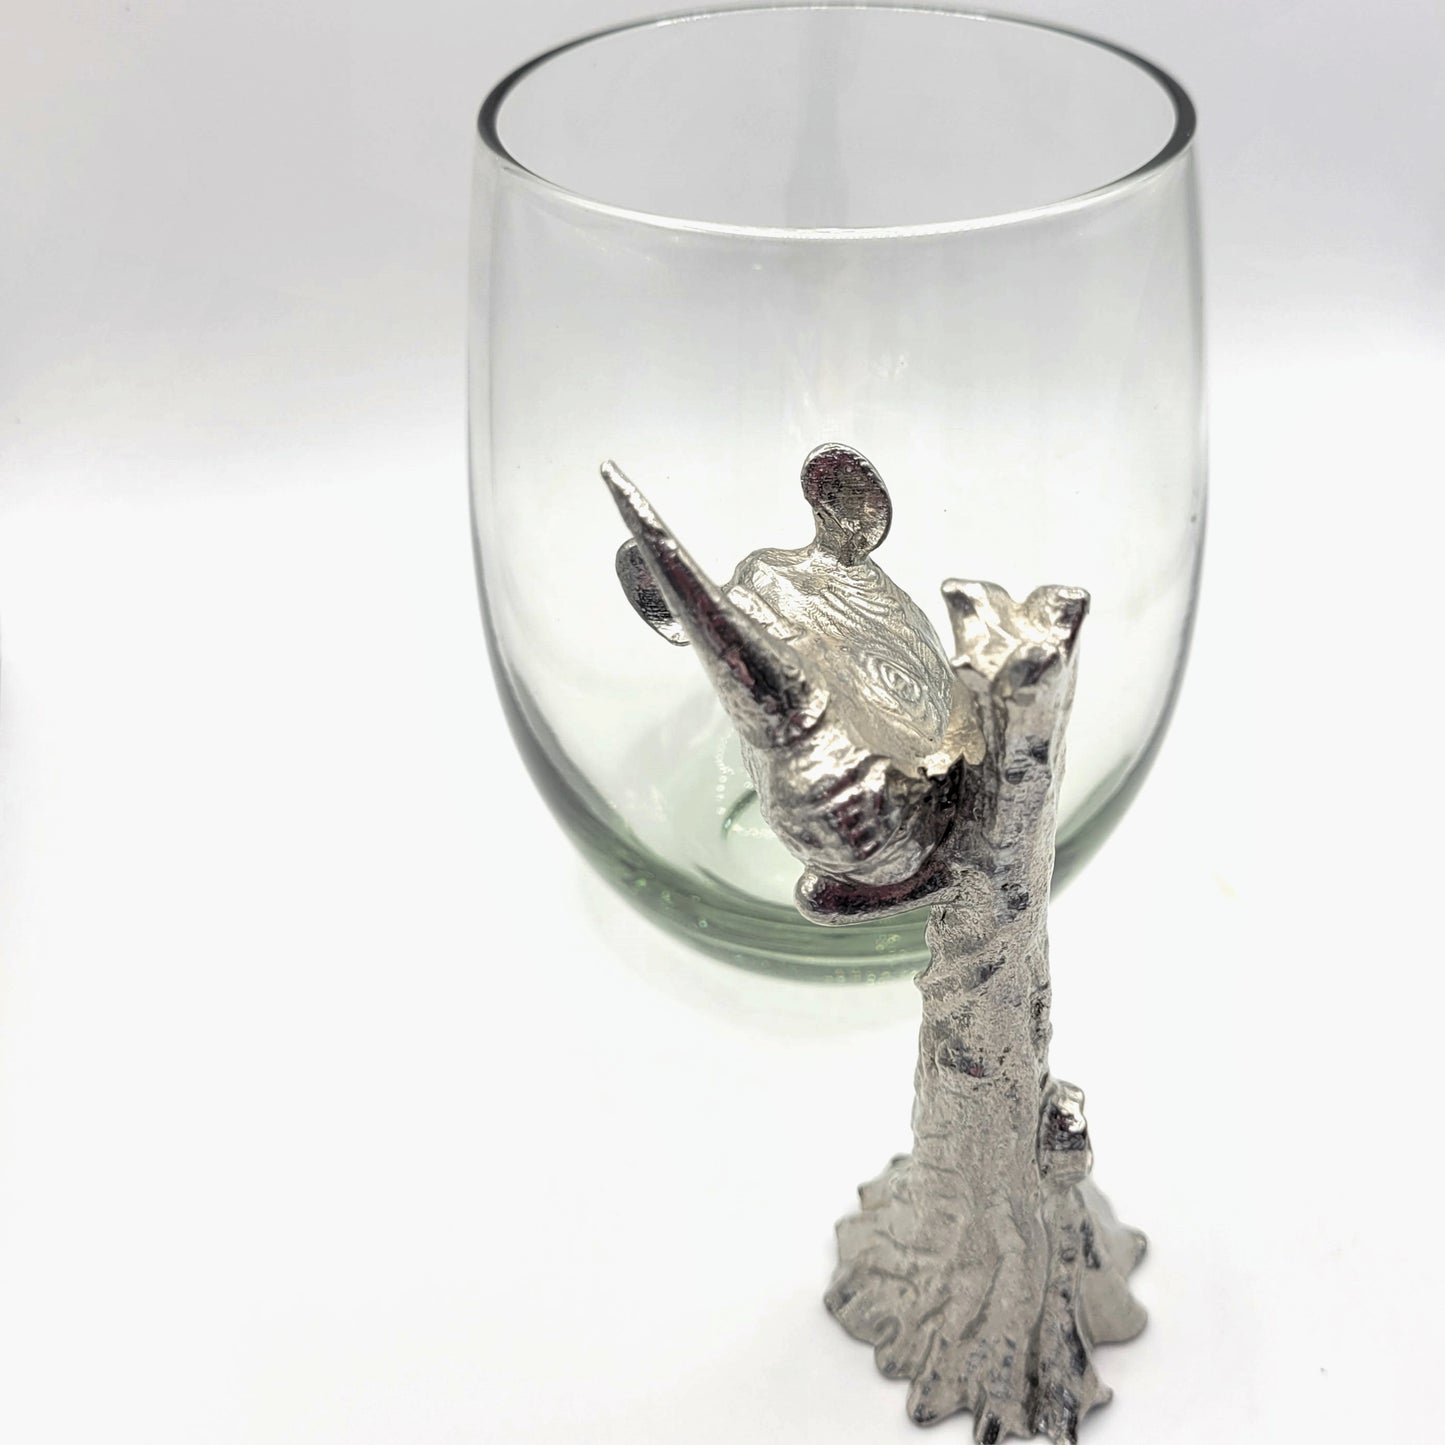 Recycled Glass and Pewter - Beer Glass - Stromm The Rhino